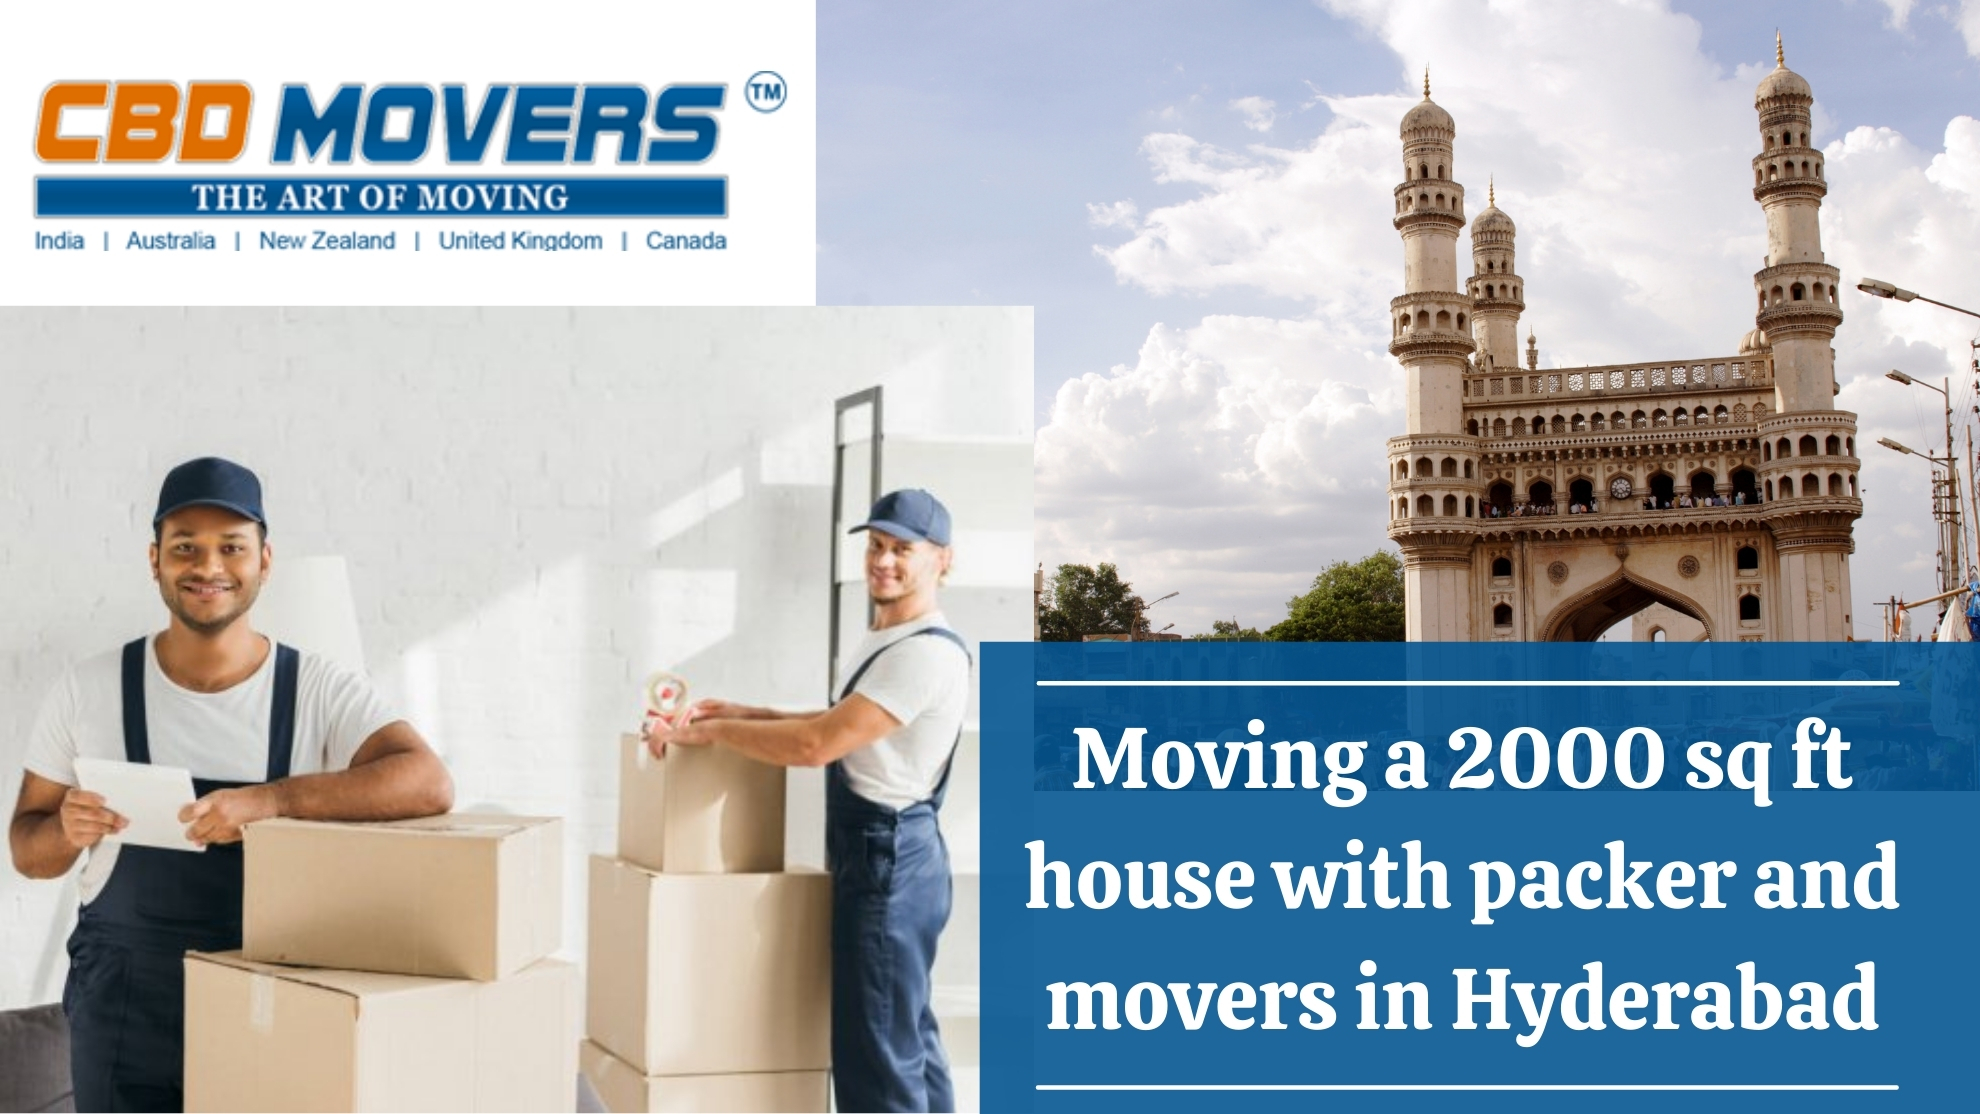 Moving a 2000 sq ft house with packer and movers in Hyderabad